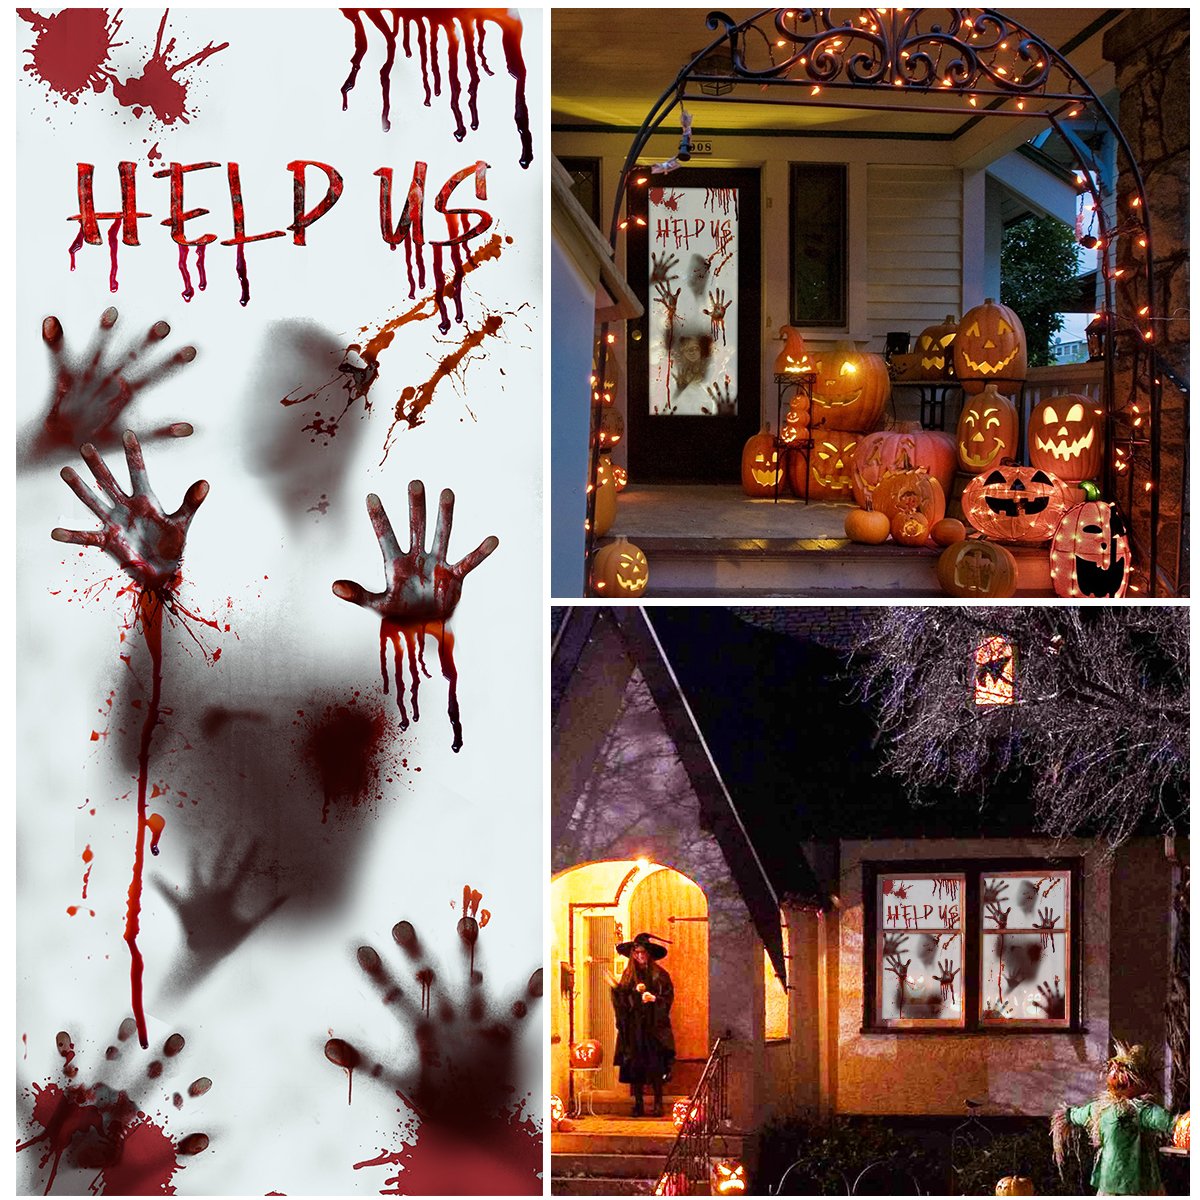 Tape this bloody and creepy haunted door decoration cover to haut visitors. This bloody and scary handprints and a shadowy figure is perfect for spooky realistic 3D effects on glass door or window on backlighting. Get more Halloween door decorations from Amazon. 